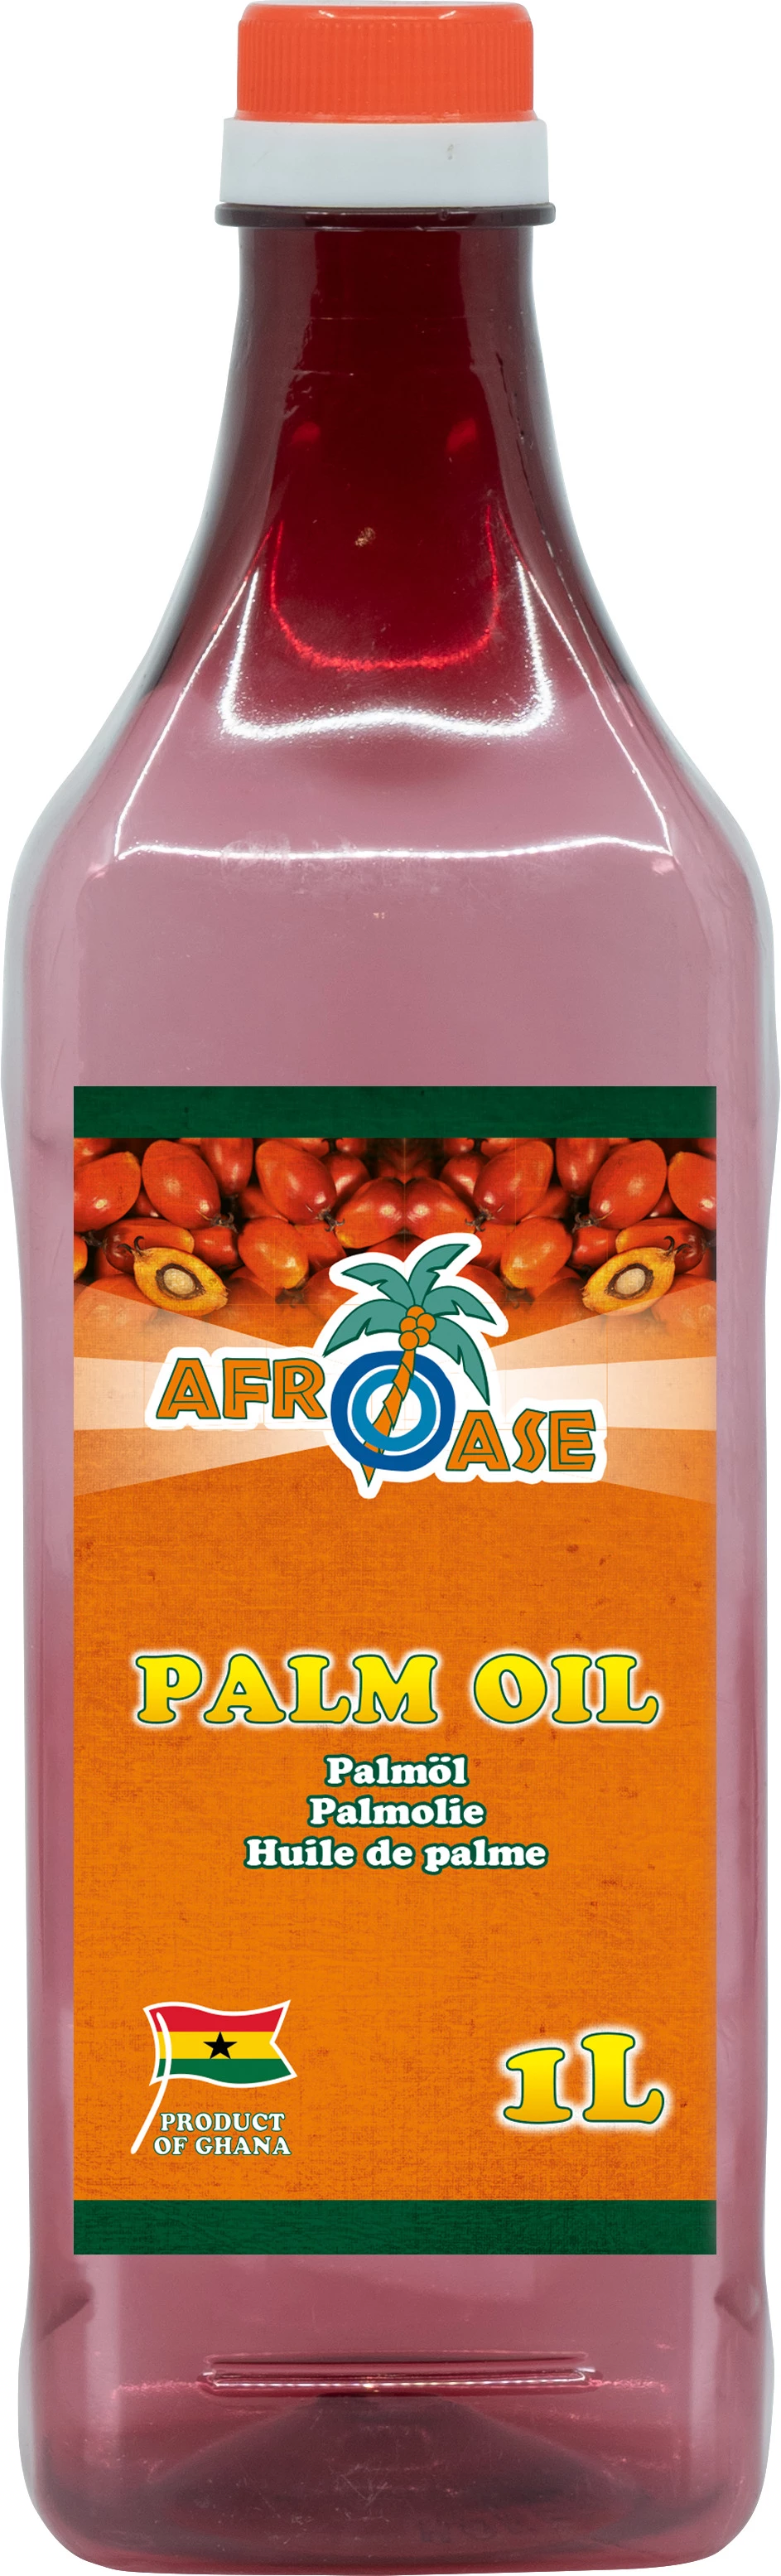 Palm Oil (classic) 12 X 1 Ltr - Afroase